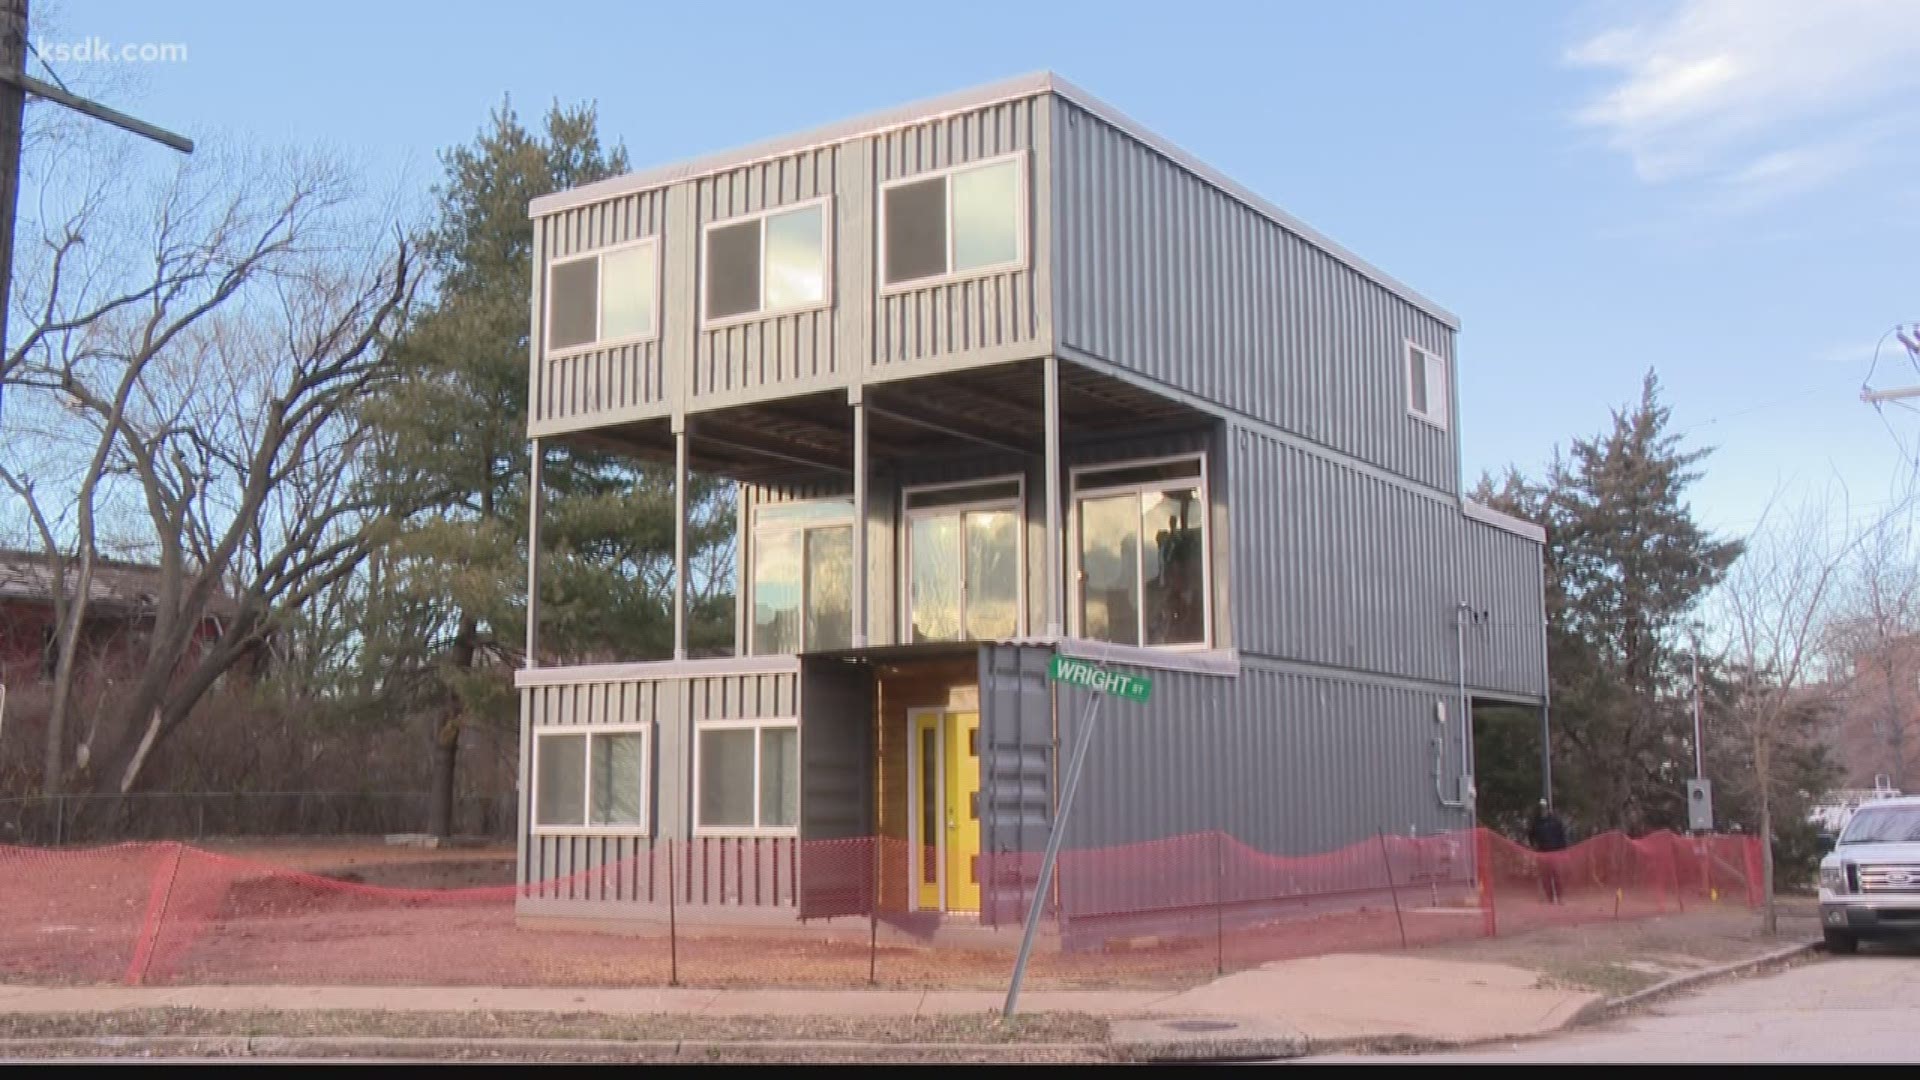 What were once old, useless steel containers are now a living space in St. Louis. It might be the most unique home inside Old North St. Louis. The home is made out of shipping containers.